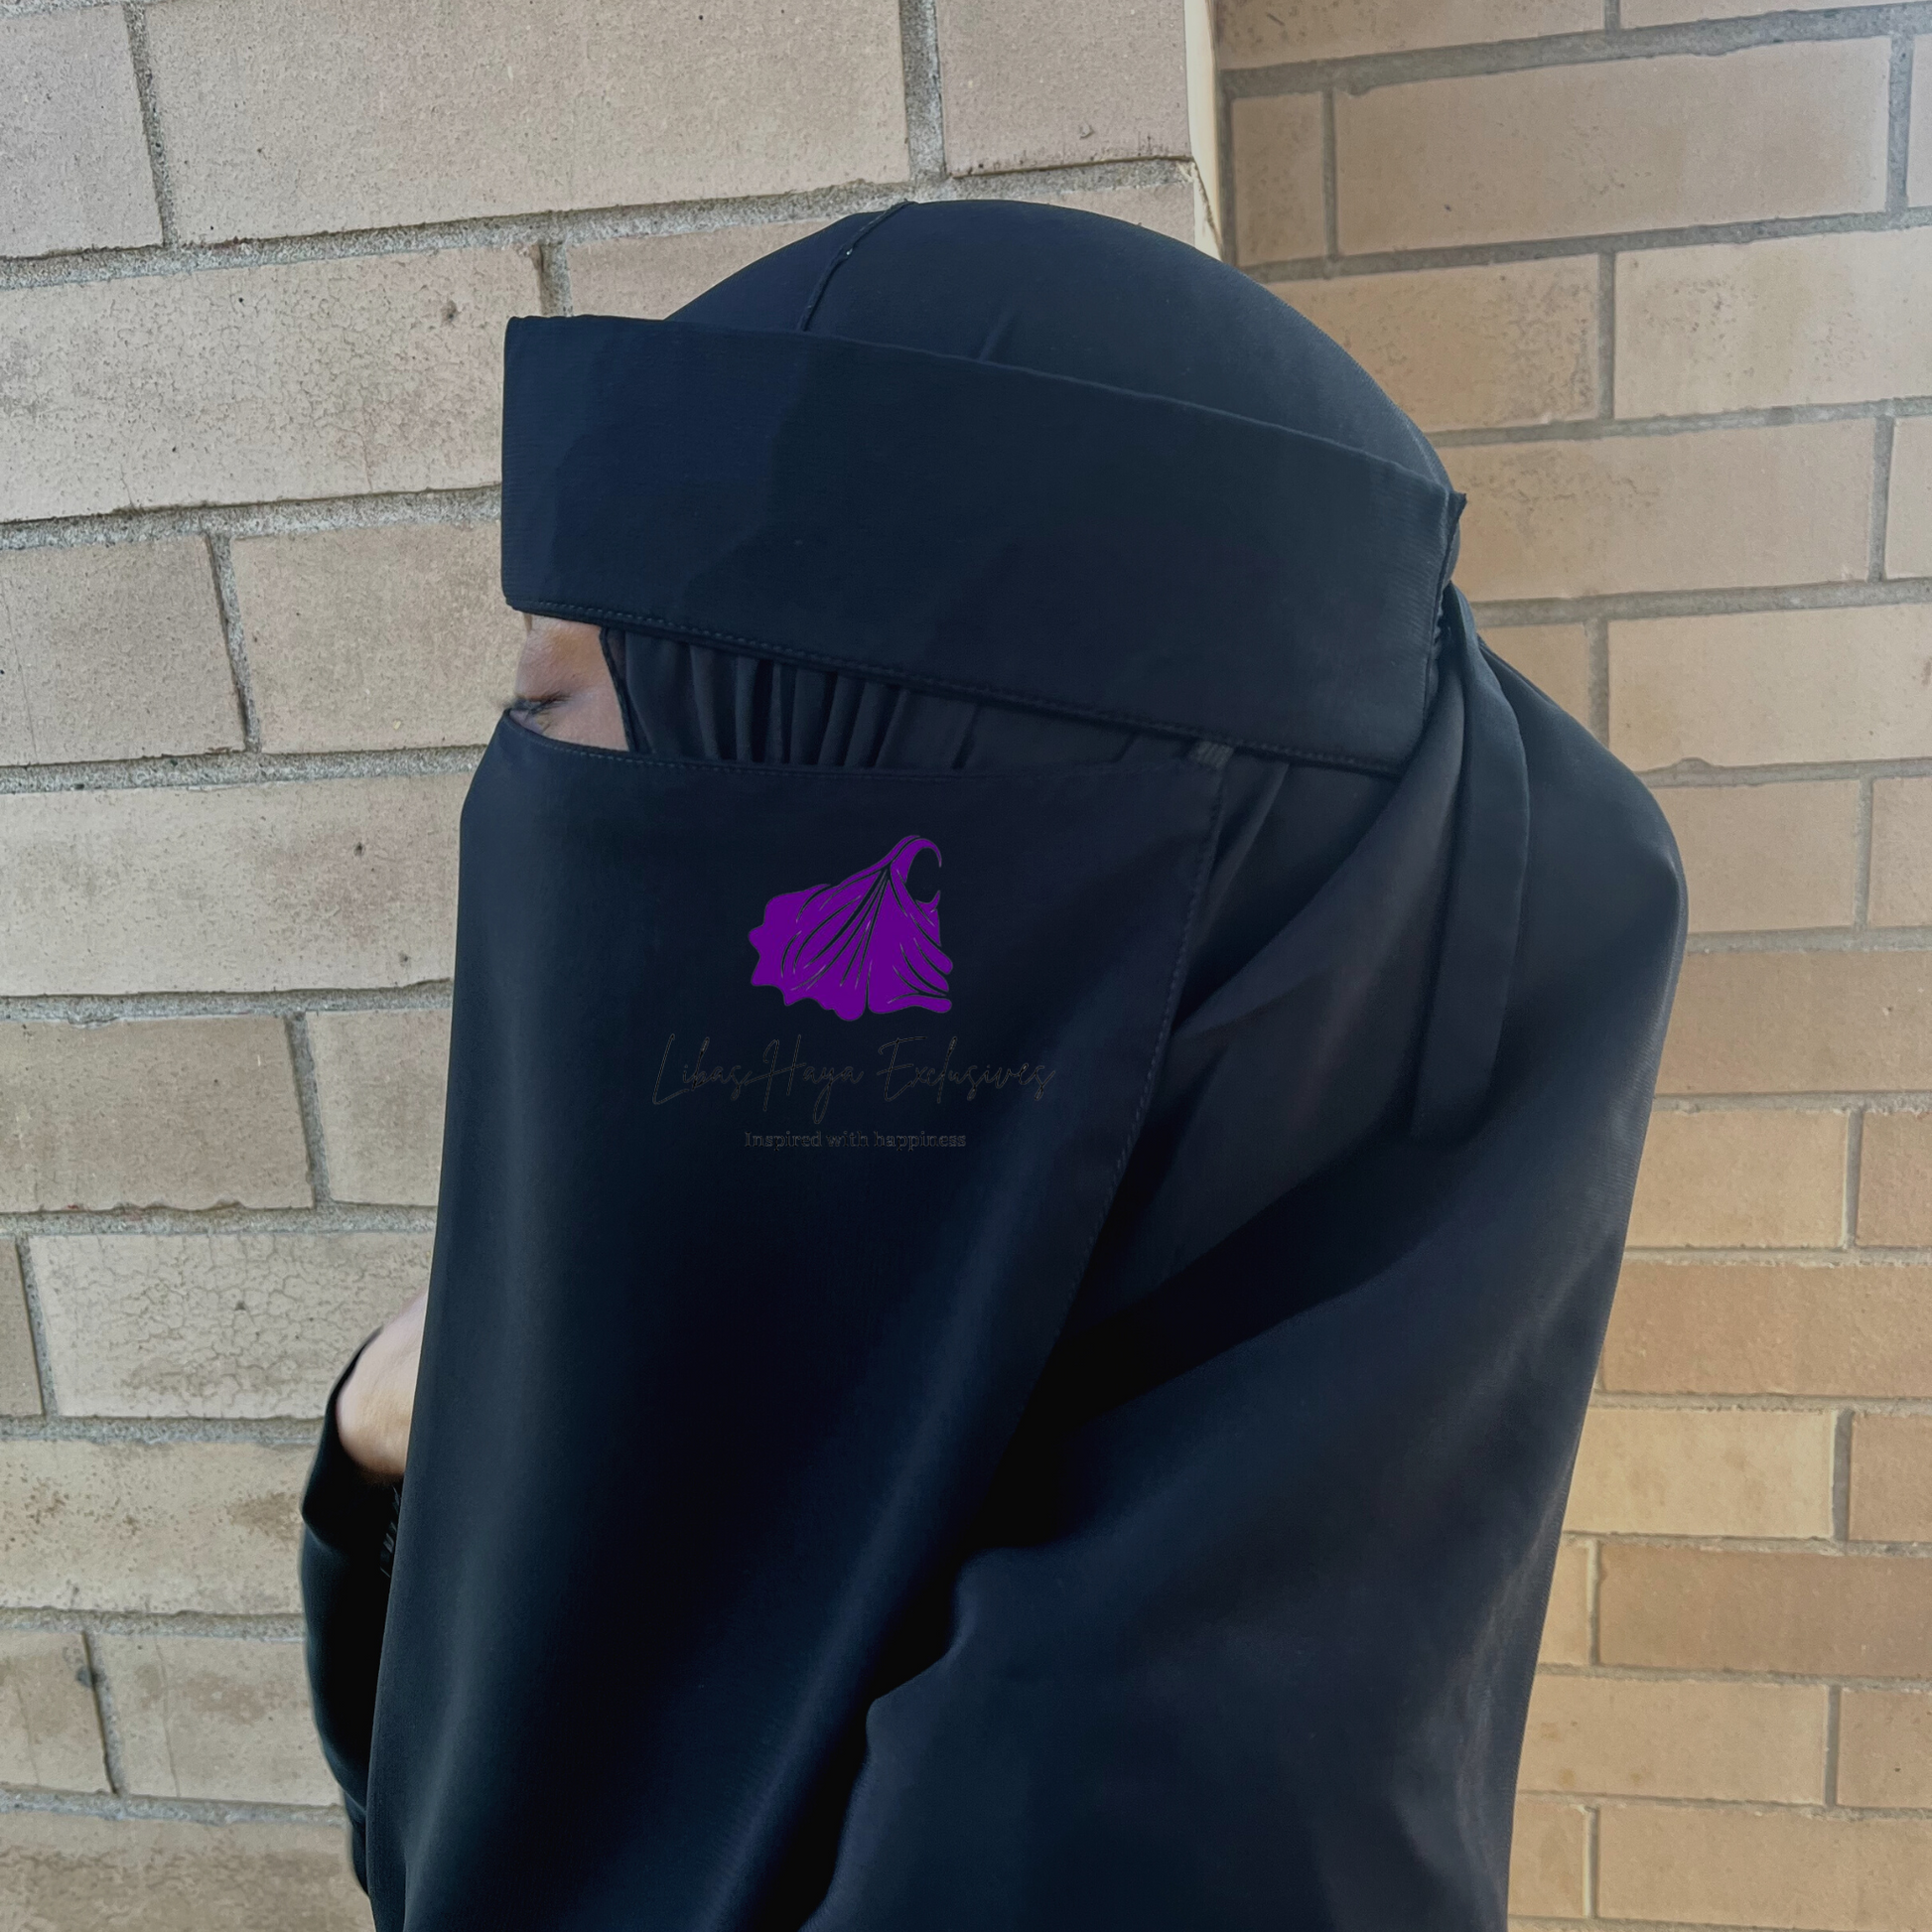 Saudi style niqab in black with pull down feature